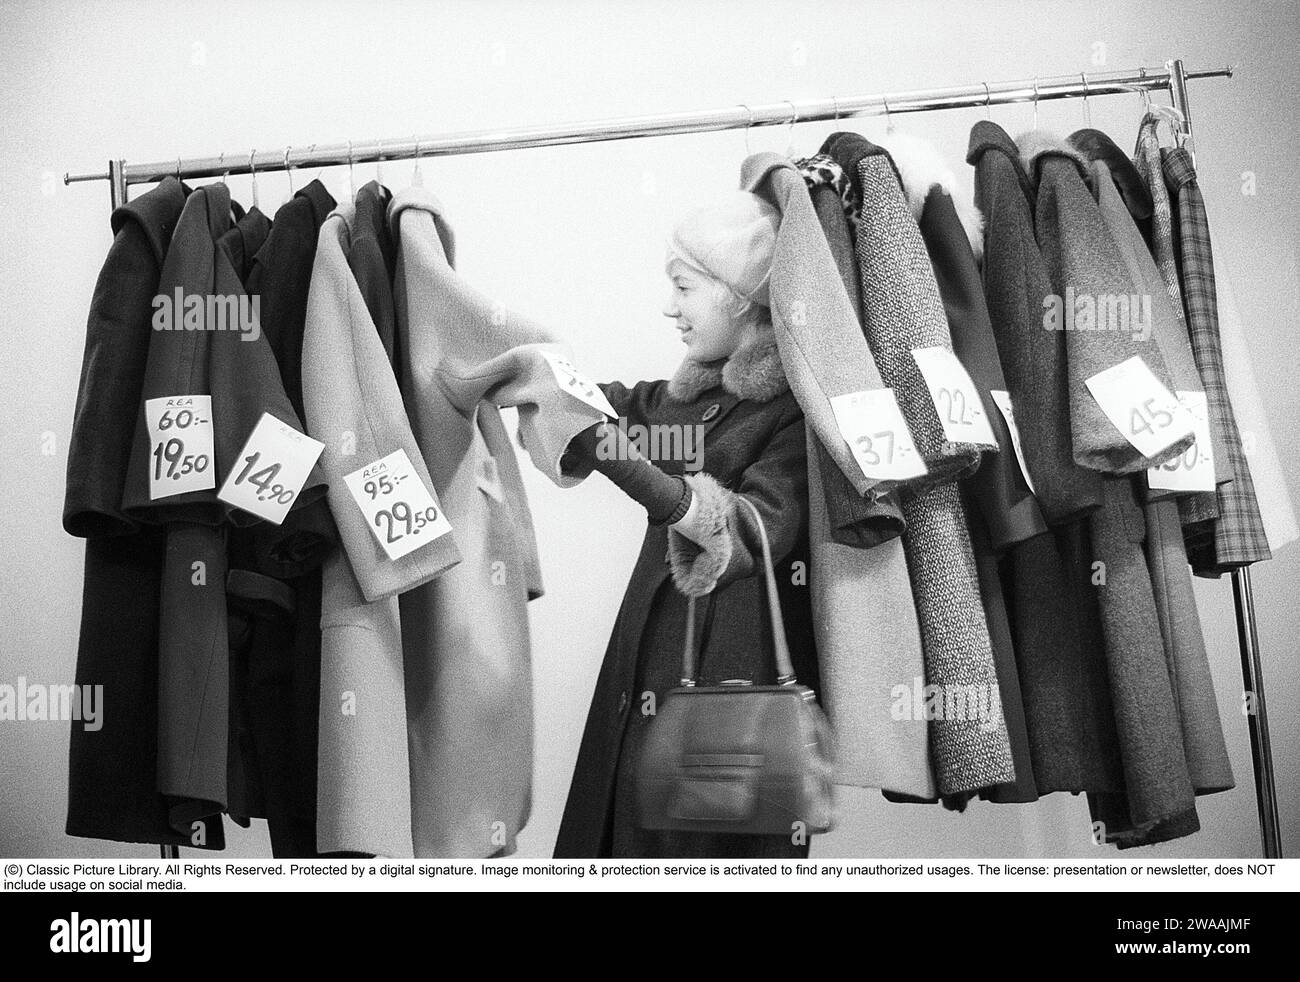 https://c8.alamy.com/comp/2WAAJMF/great-discounts-of-outerwear-in-the-1960s-a-woman-stands-by-a-clothes-rack-choosing-from-outerwear-and-coats-marked-with-price-tags-with-discounted-prices-judging-by-her-face-she-appreciates-the-reduced-prices-and-thinks-shes-getting-real-bargains-sweden-january-1963-ref-cv28-2WAAJMF.jpg